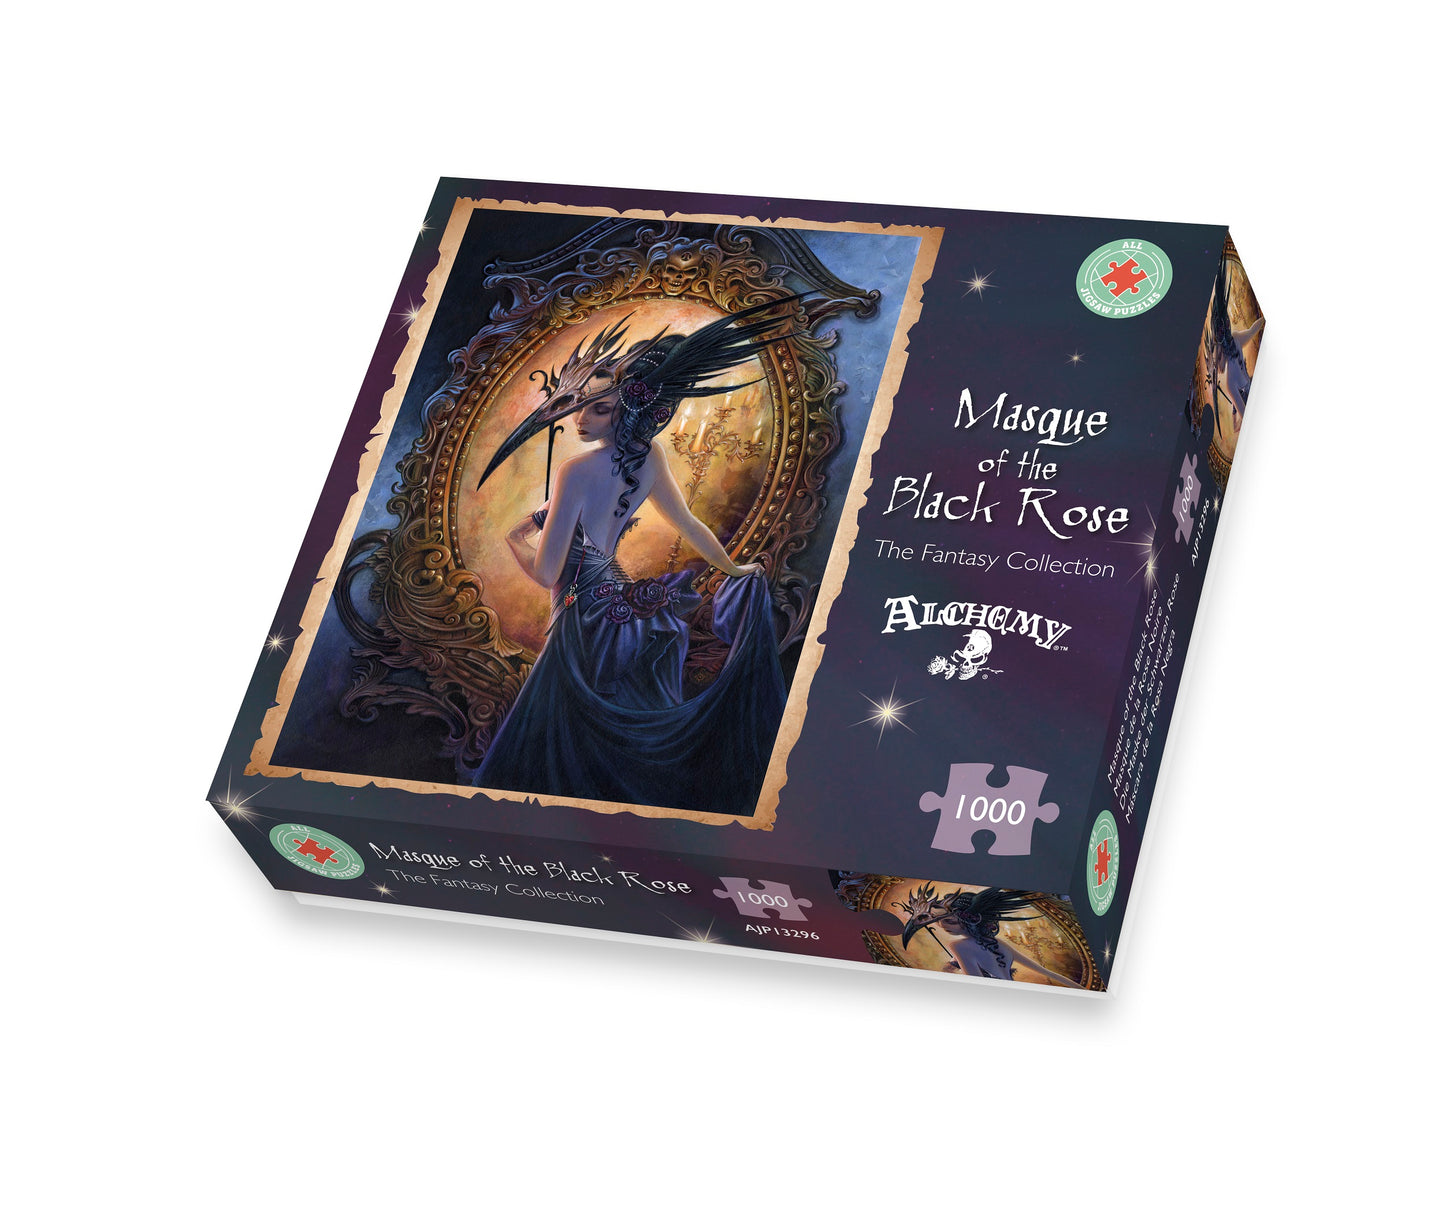 Masque of the Black Rose 1000 Piece Jigsaw Puzzle